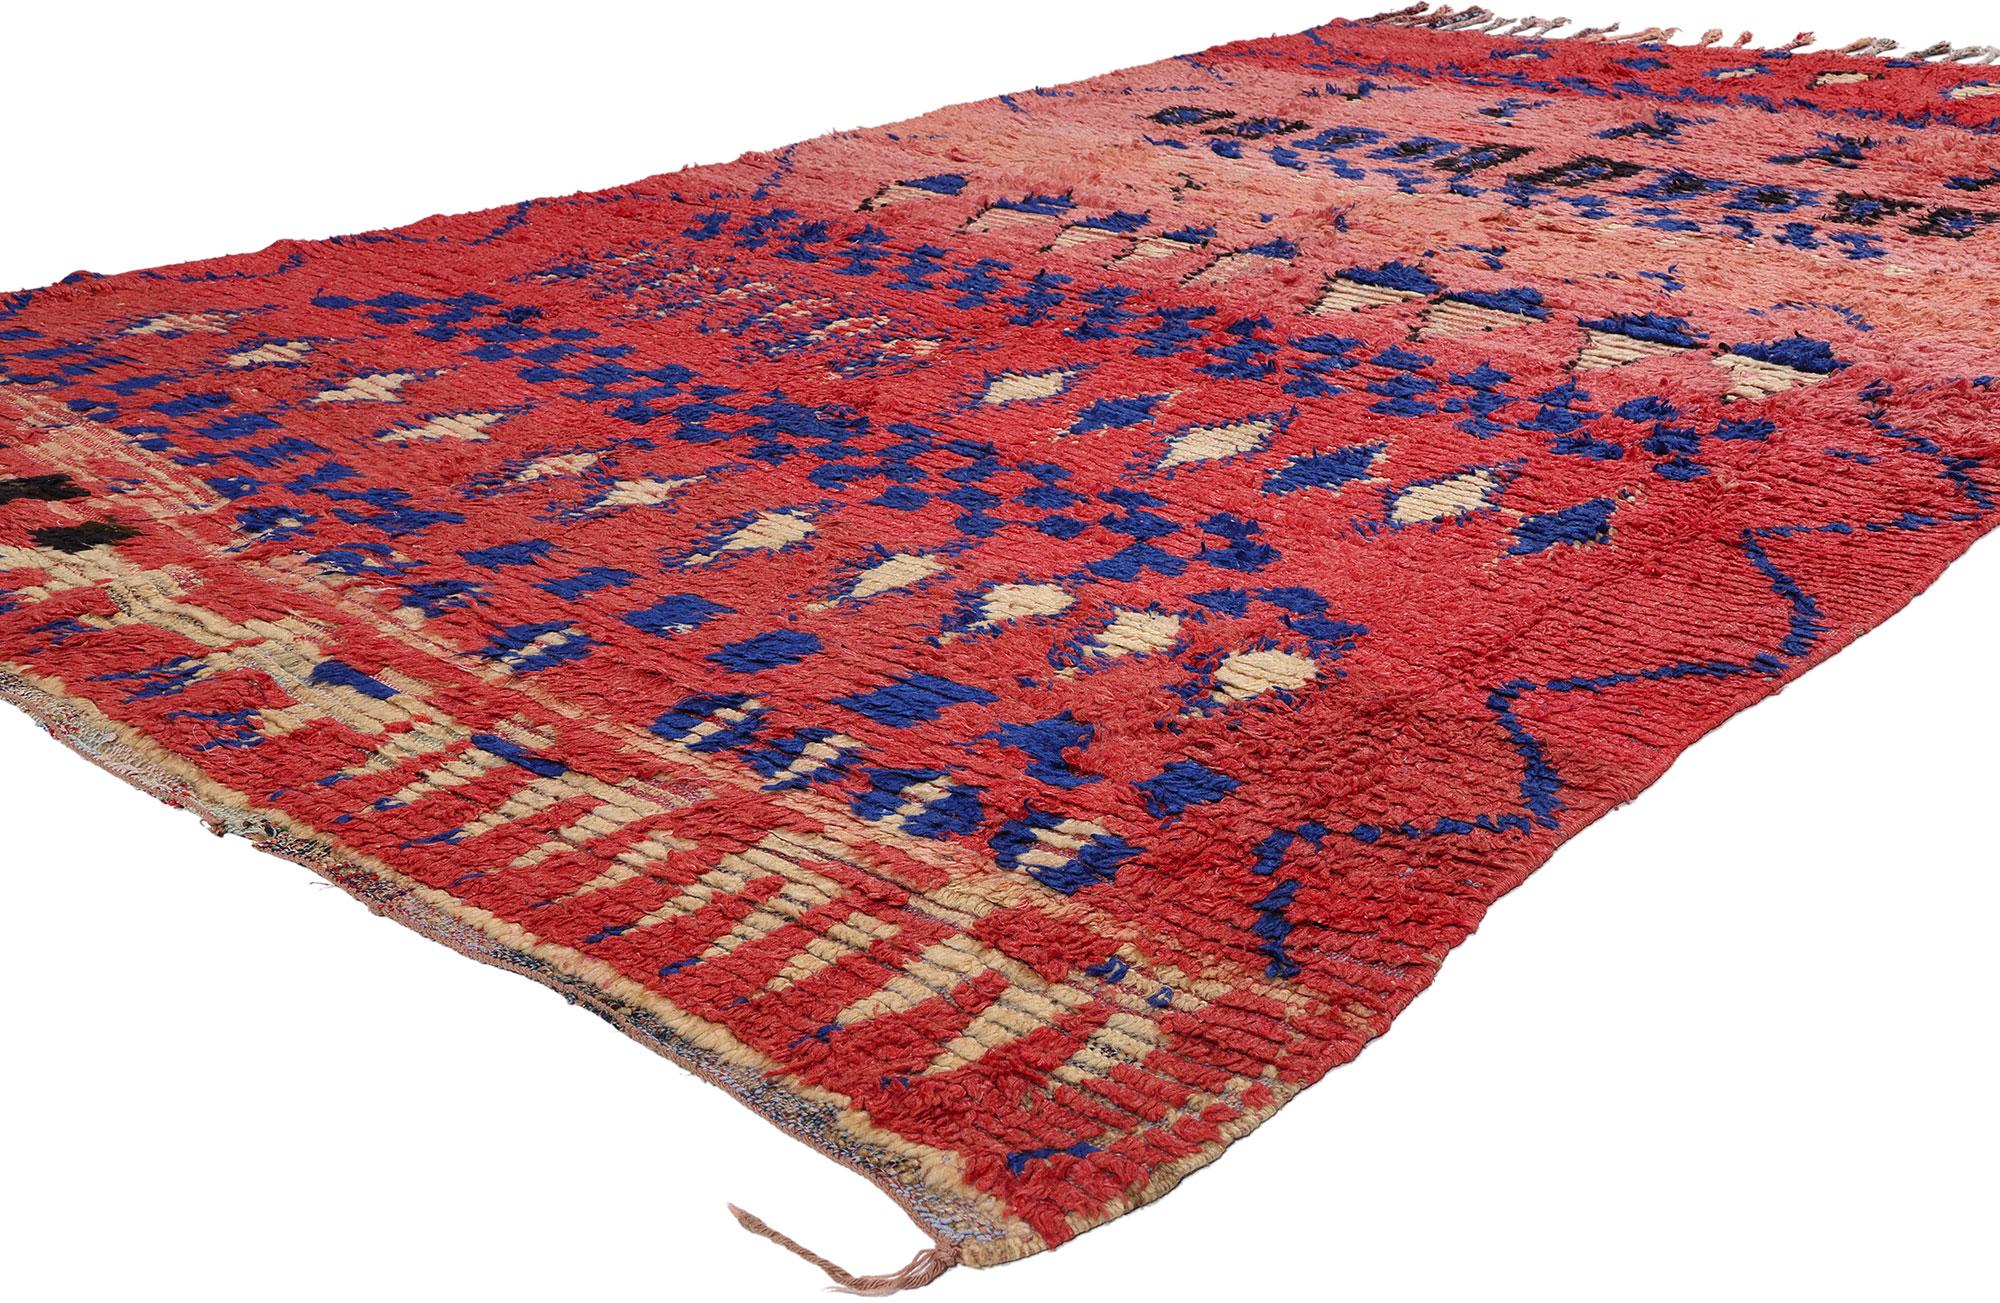 21801 Vintage Red Boujad Moroccan Rug, 05'08 x 10'04. Boujad rugs, born in Morocco's Boujad region, transcend their practical purpose to emerge as exquisite handwoven treasures that encapsulate the vibrant artistic heritage of Berber tribes,